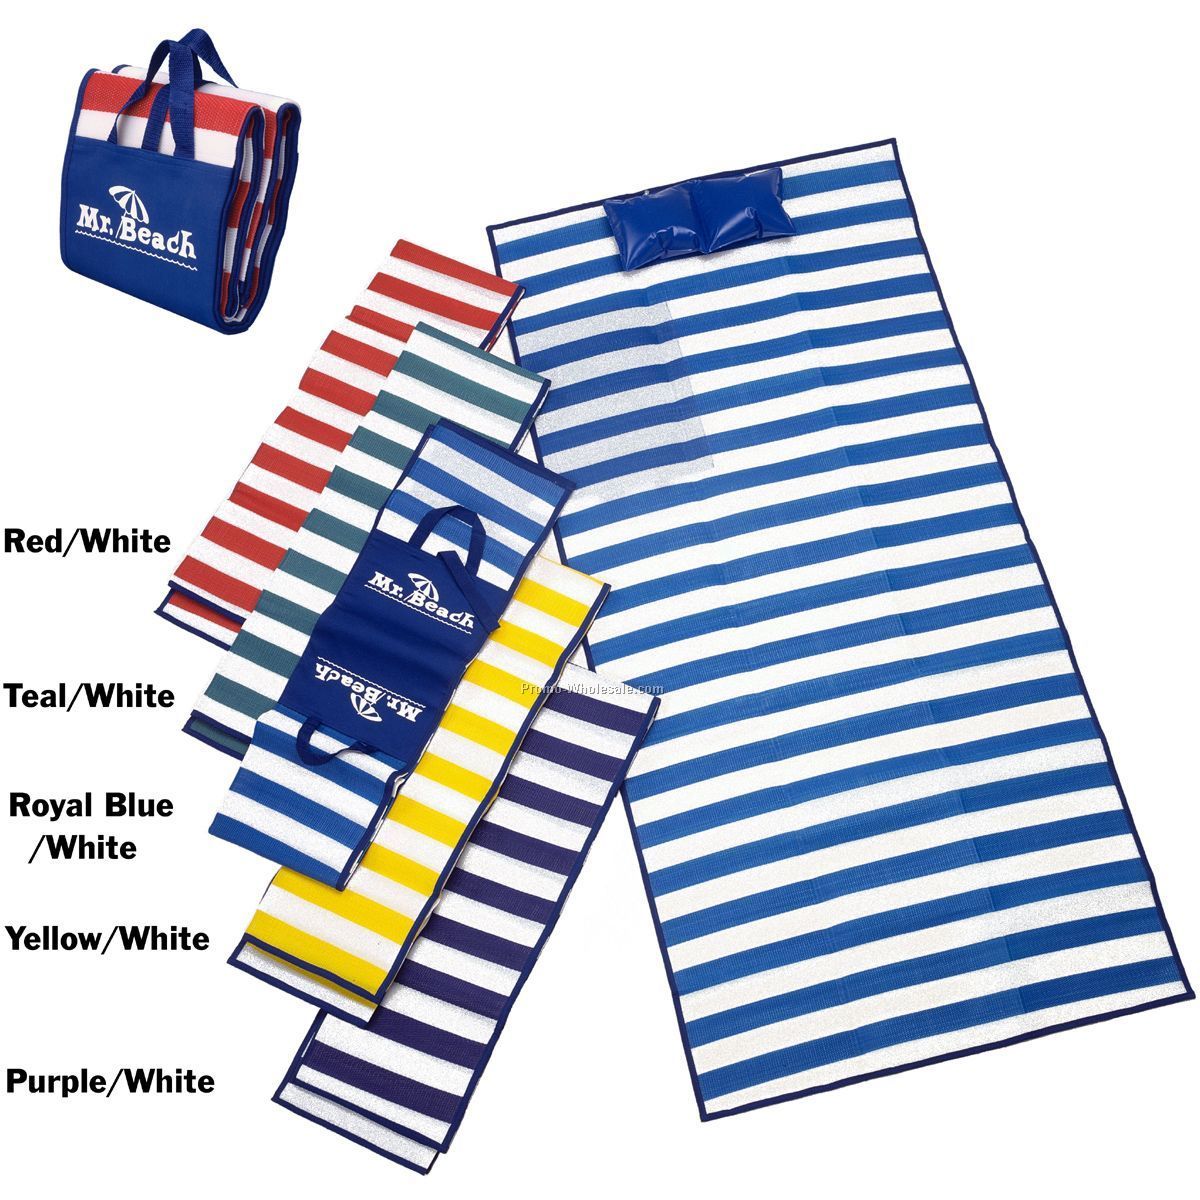 Deluxe Striped Fold-up Beach Mat - Direct Import Orders Only